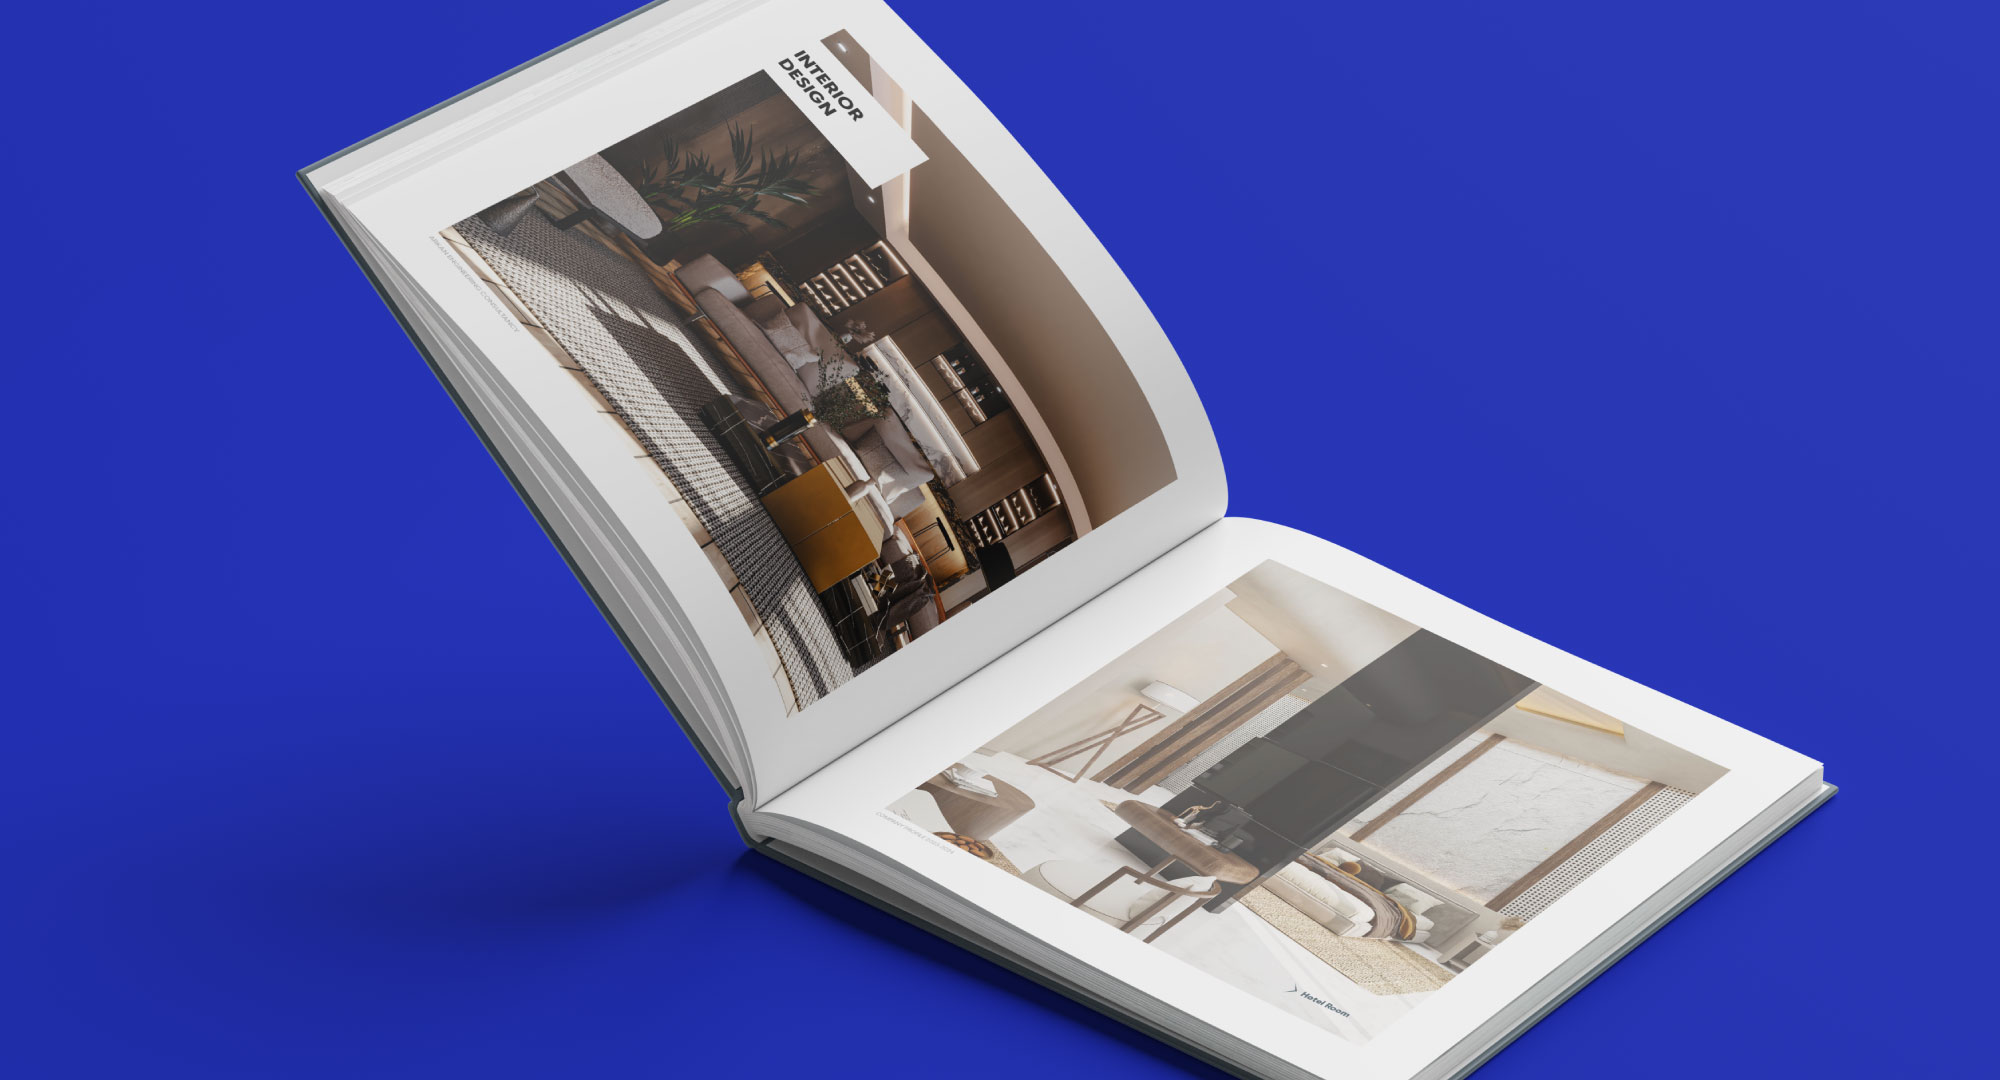 Clear and Effective: Our Catalogue & Brochure Designs Speak for Your Products